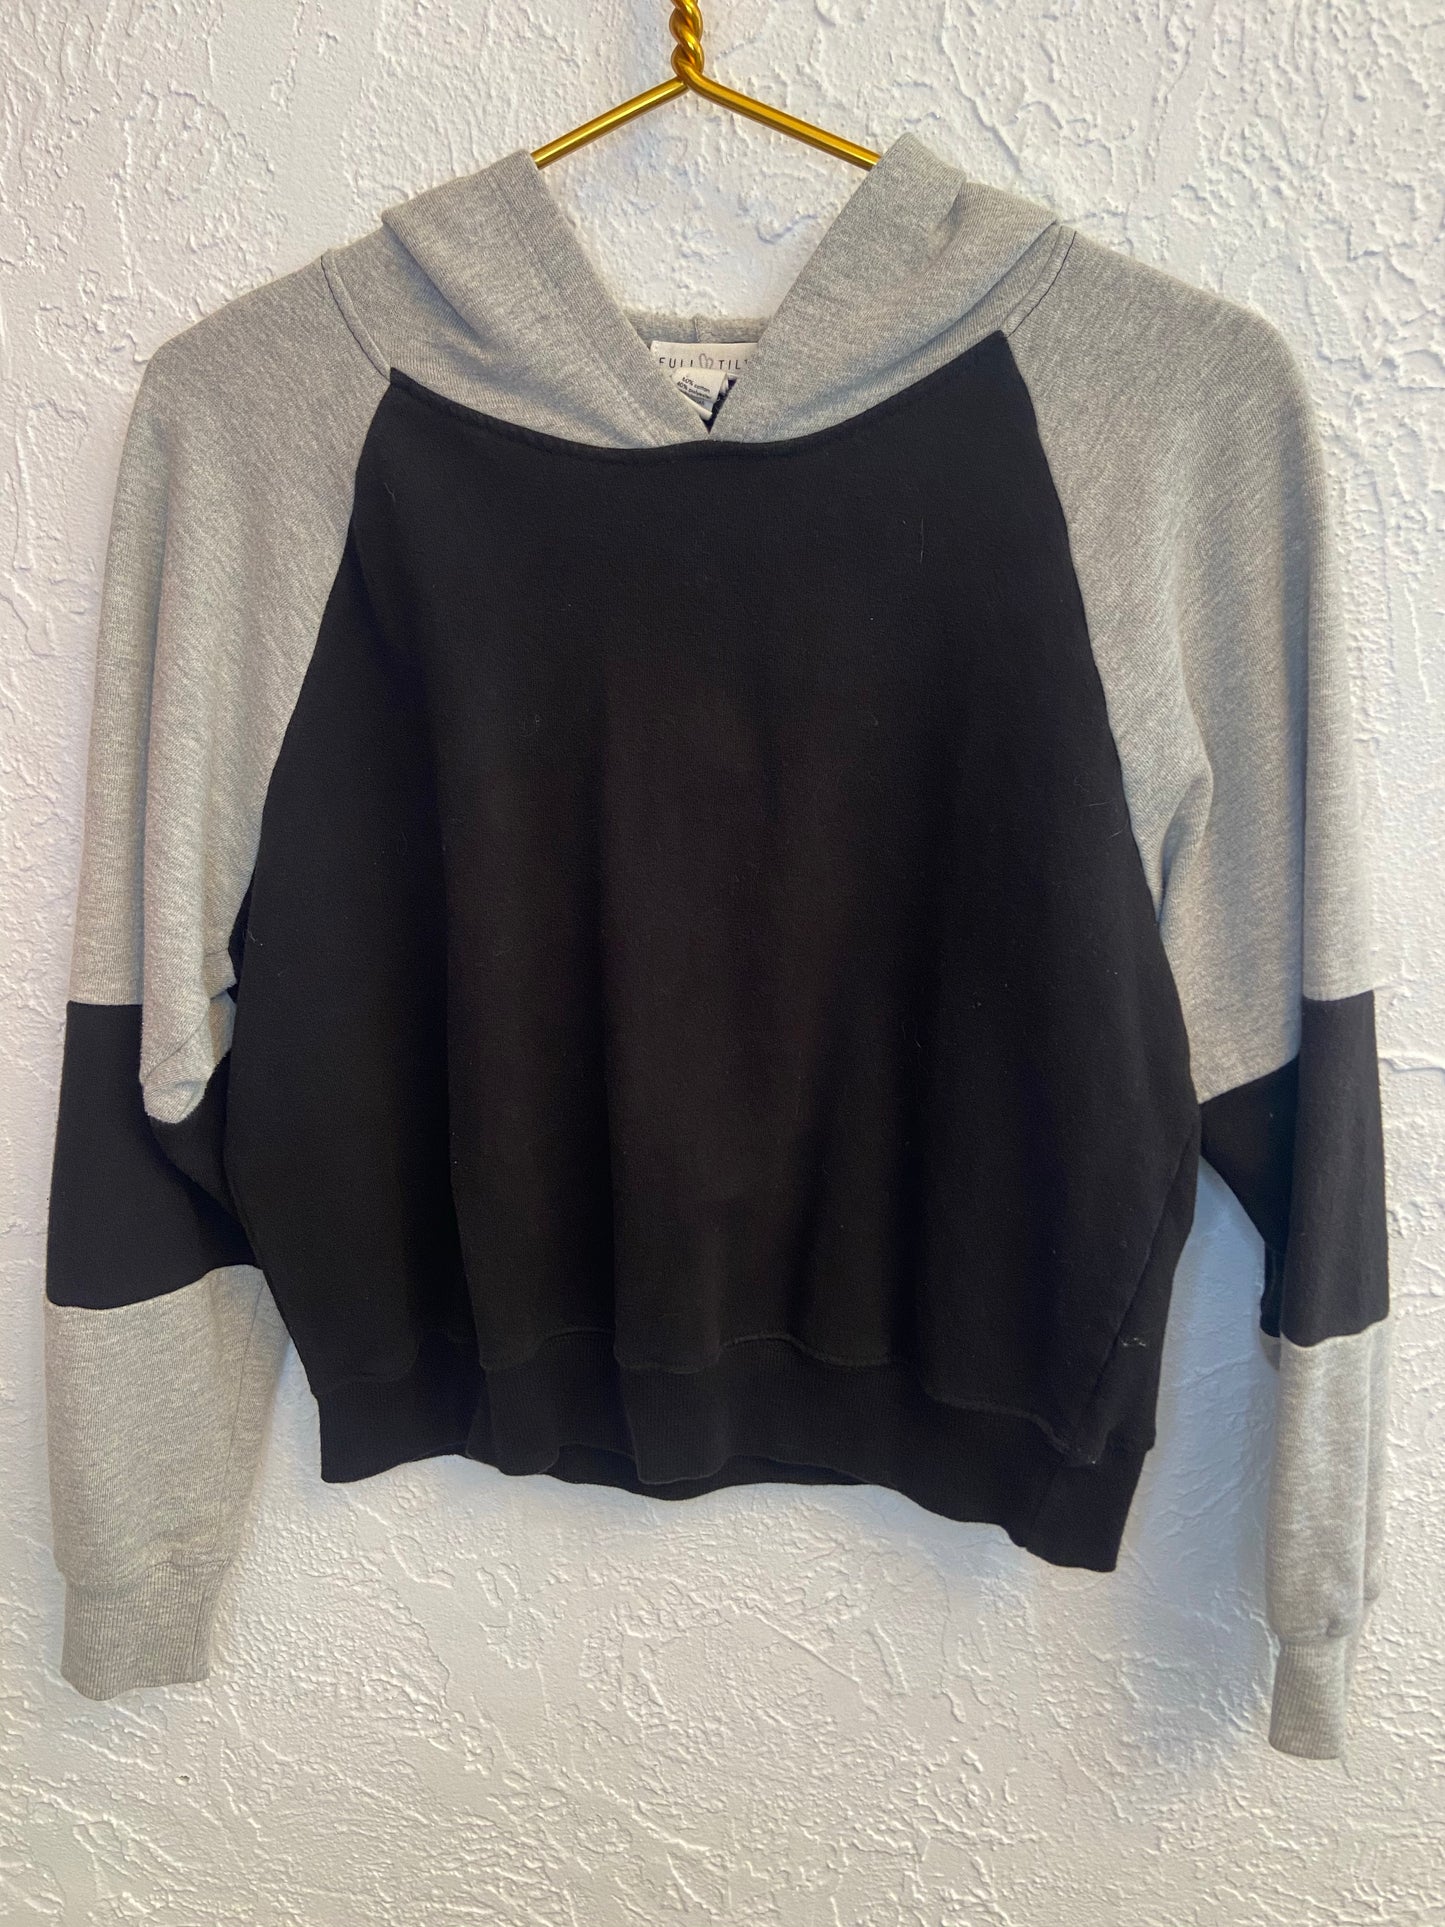 Cropped Black and Gray Hoodie- M